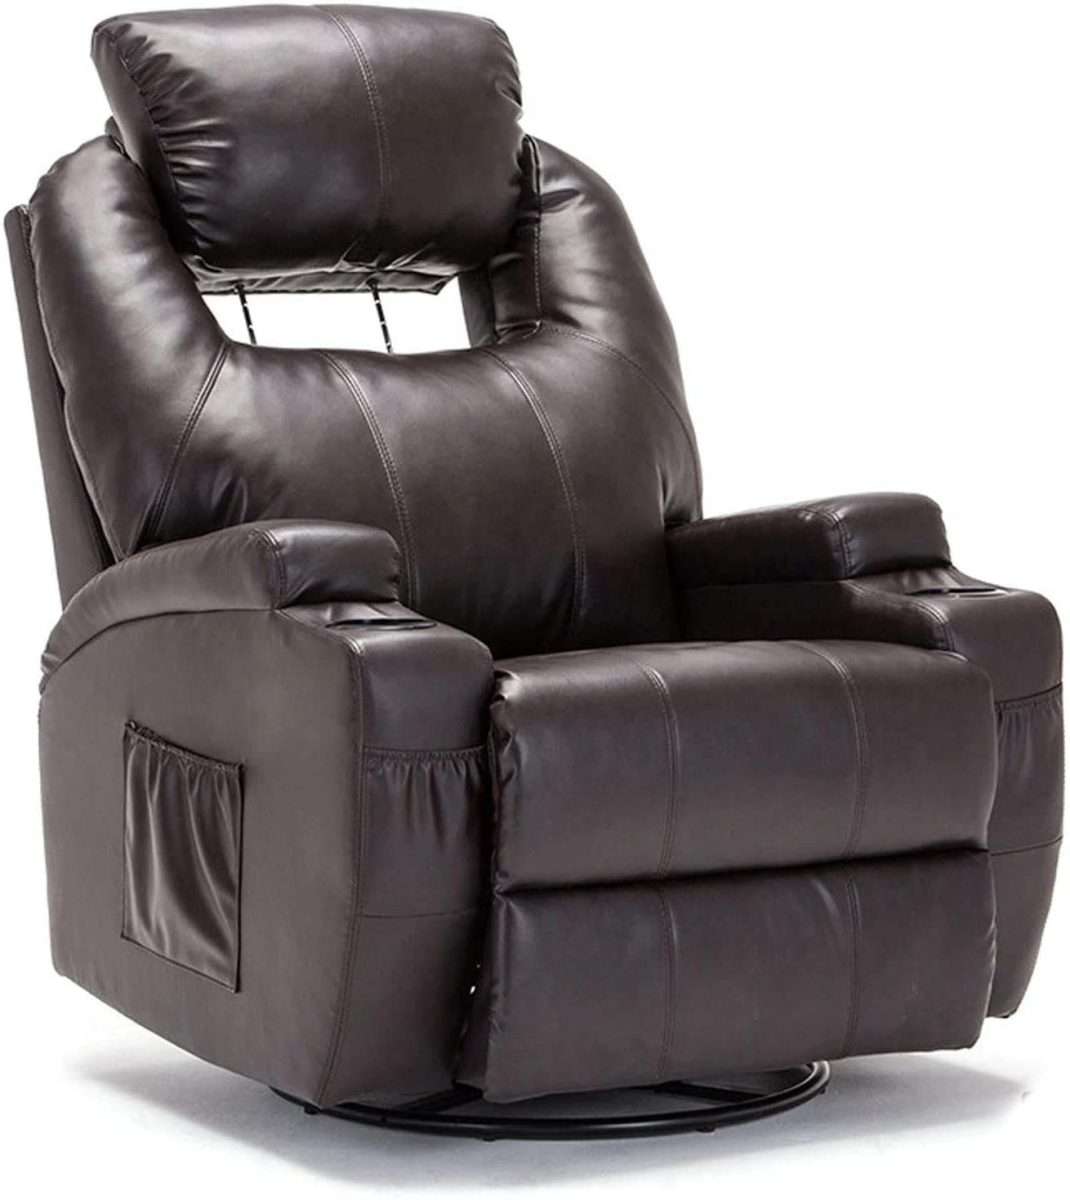 Massage Recliner Chair Bonded Leather Heated Reclining Rocker Lounge ...